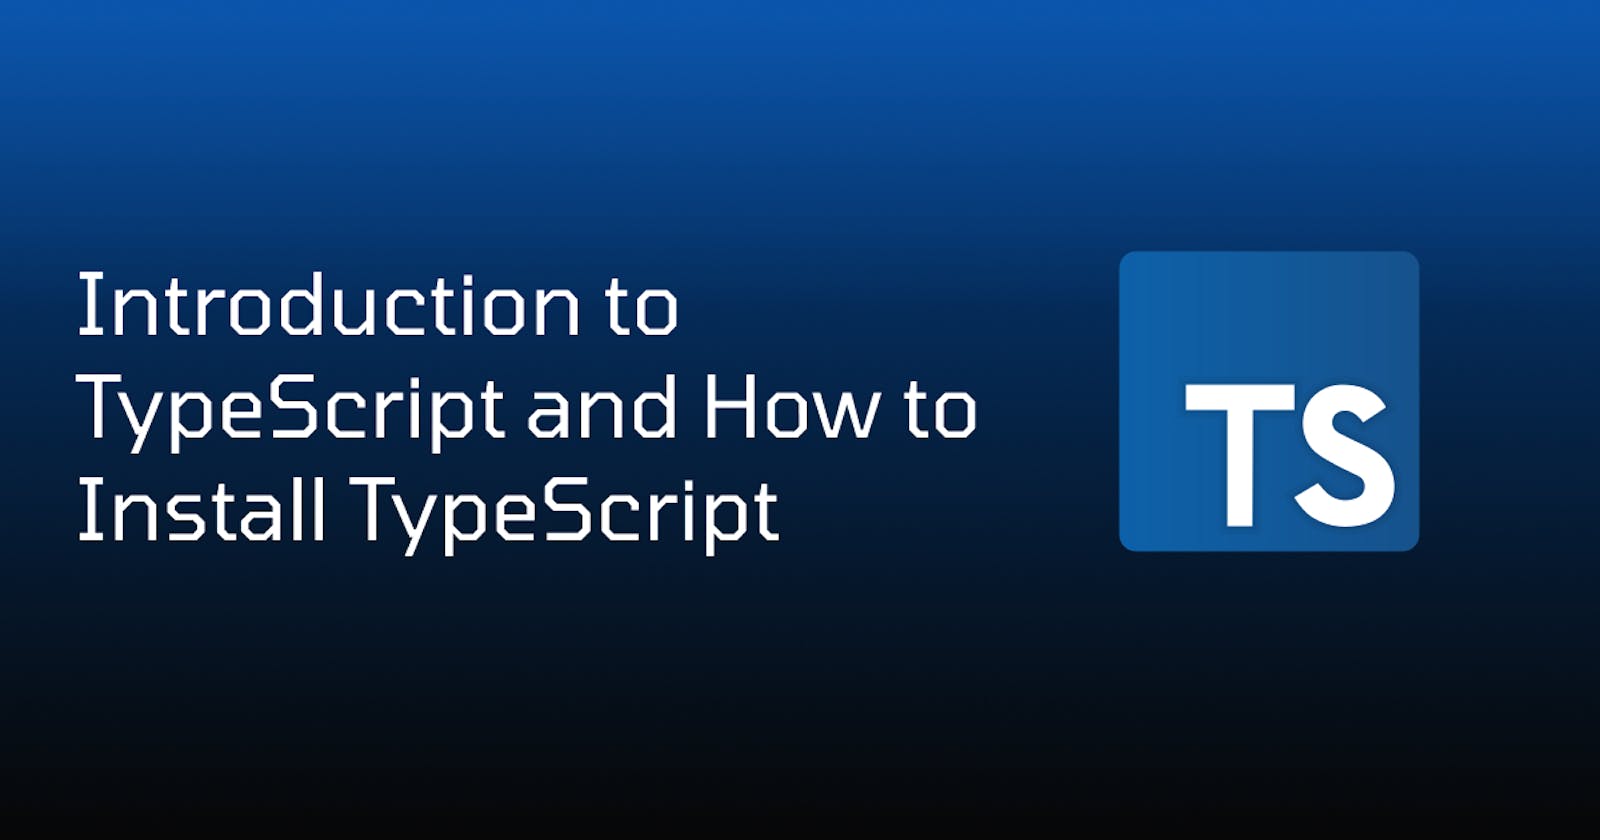 Introduction to TypeScript and How to Install TypeScript